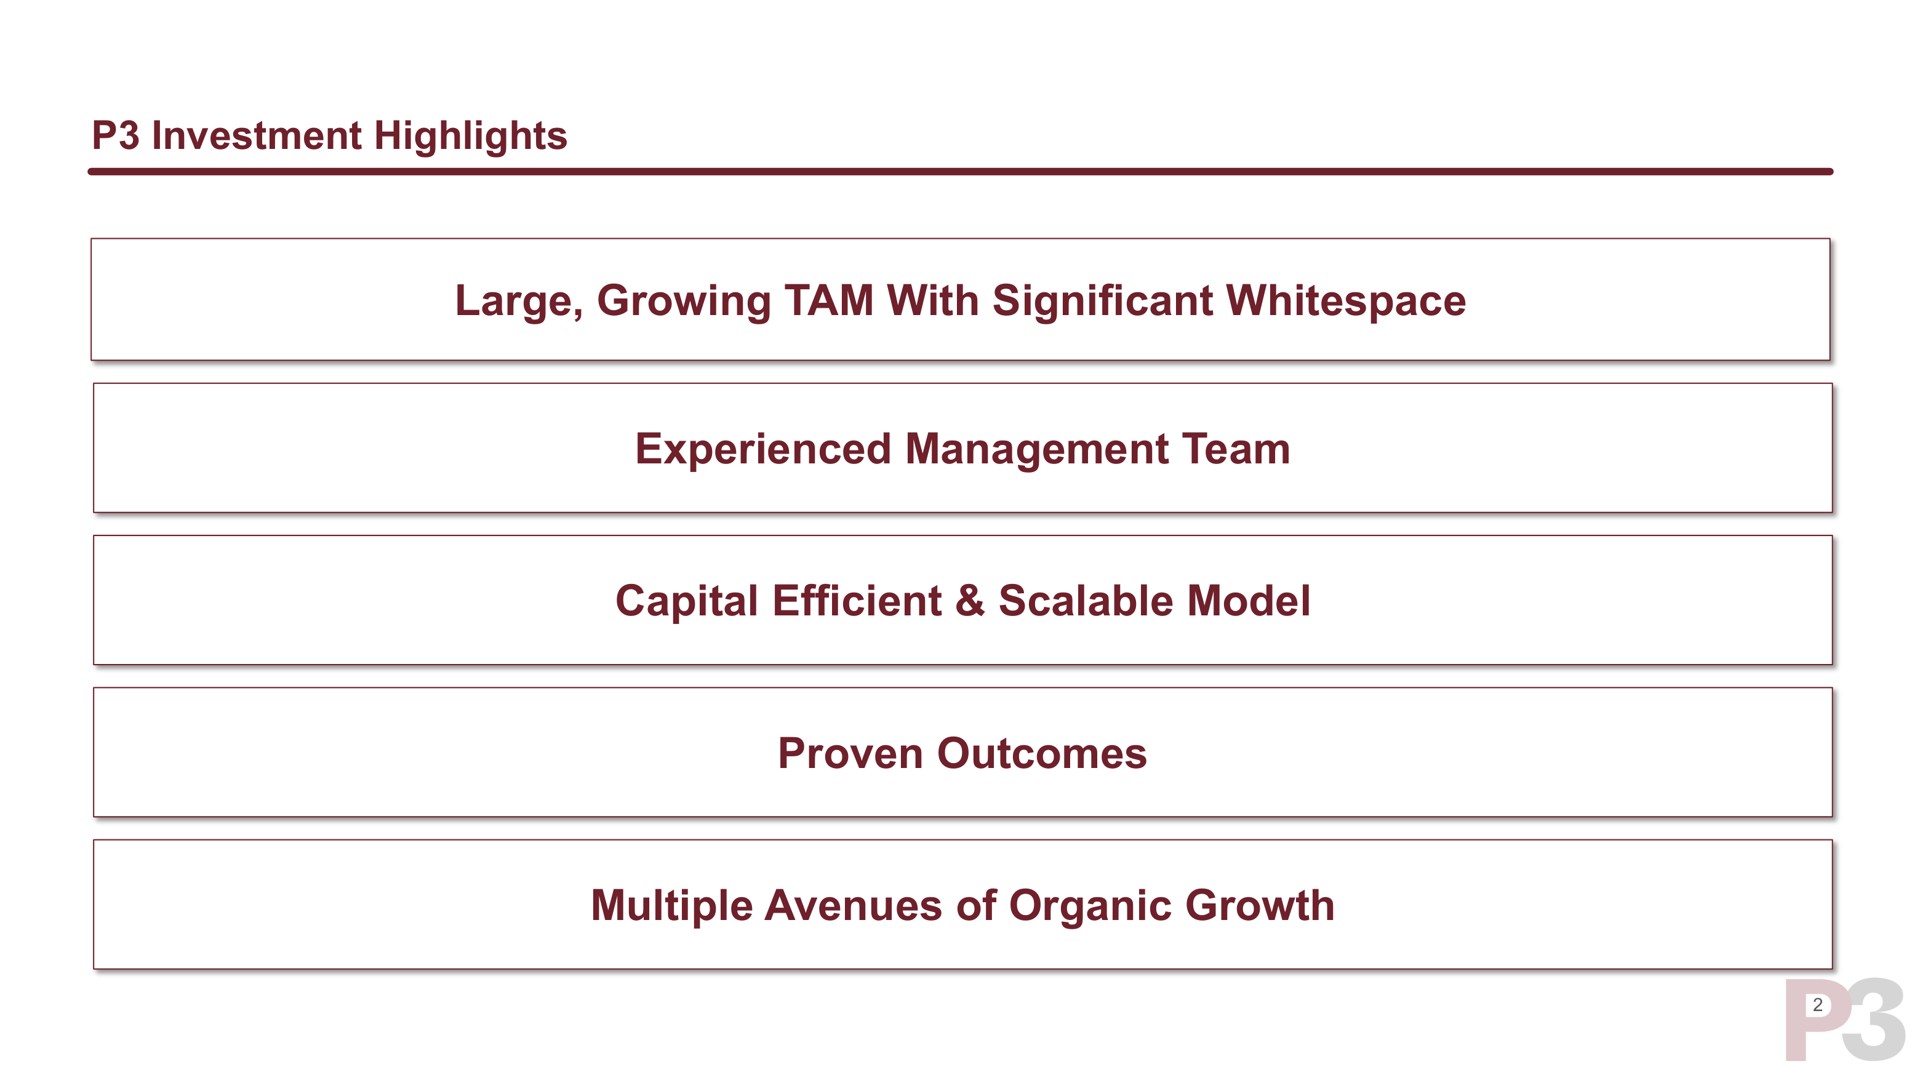 investment highlights large growing tam with significant experienced management team capital efficient scalable model proven outcomes multiple avenues of organic growth | P3 Health Partners